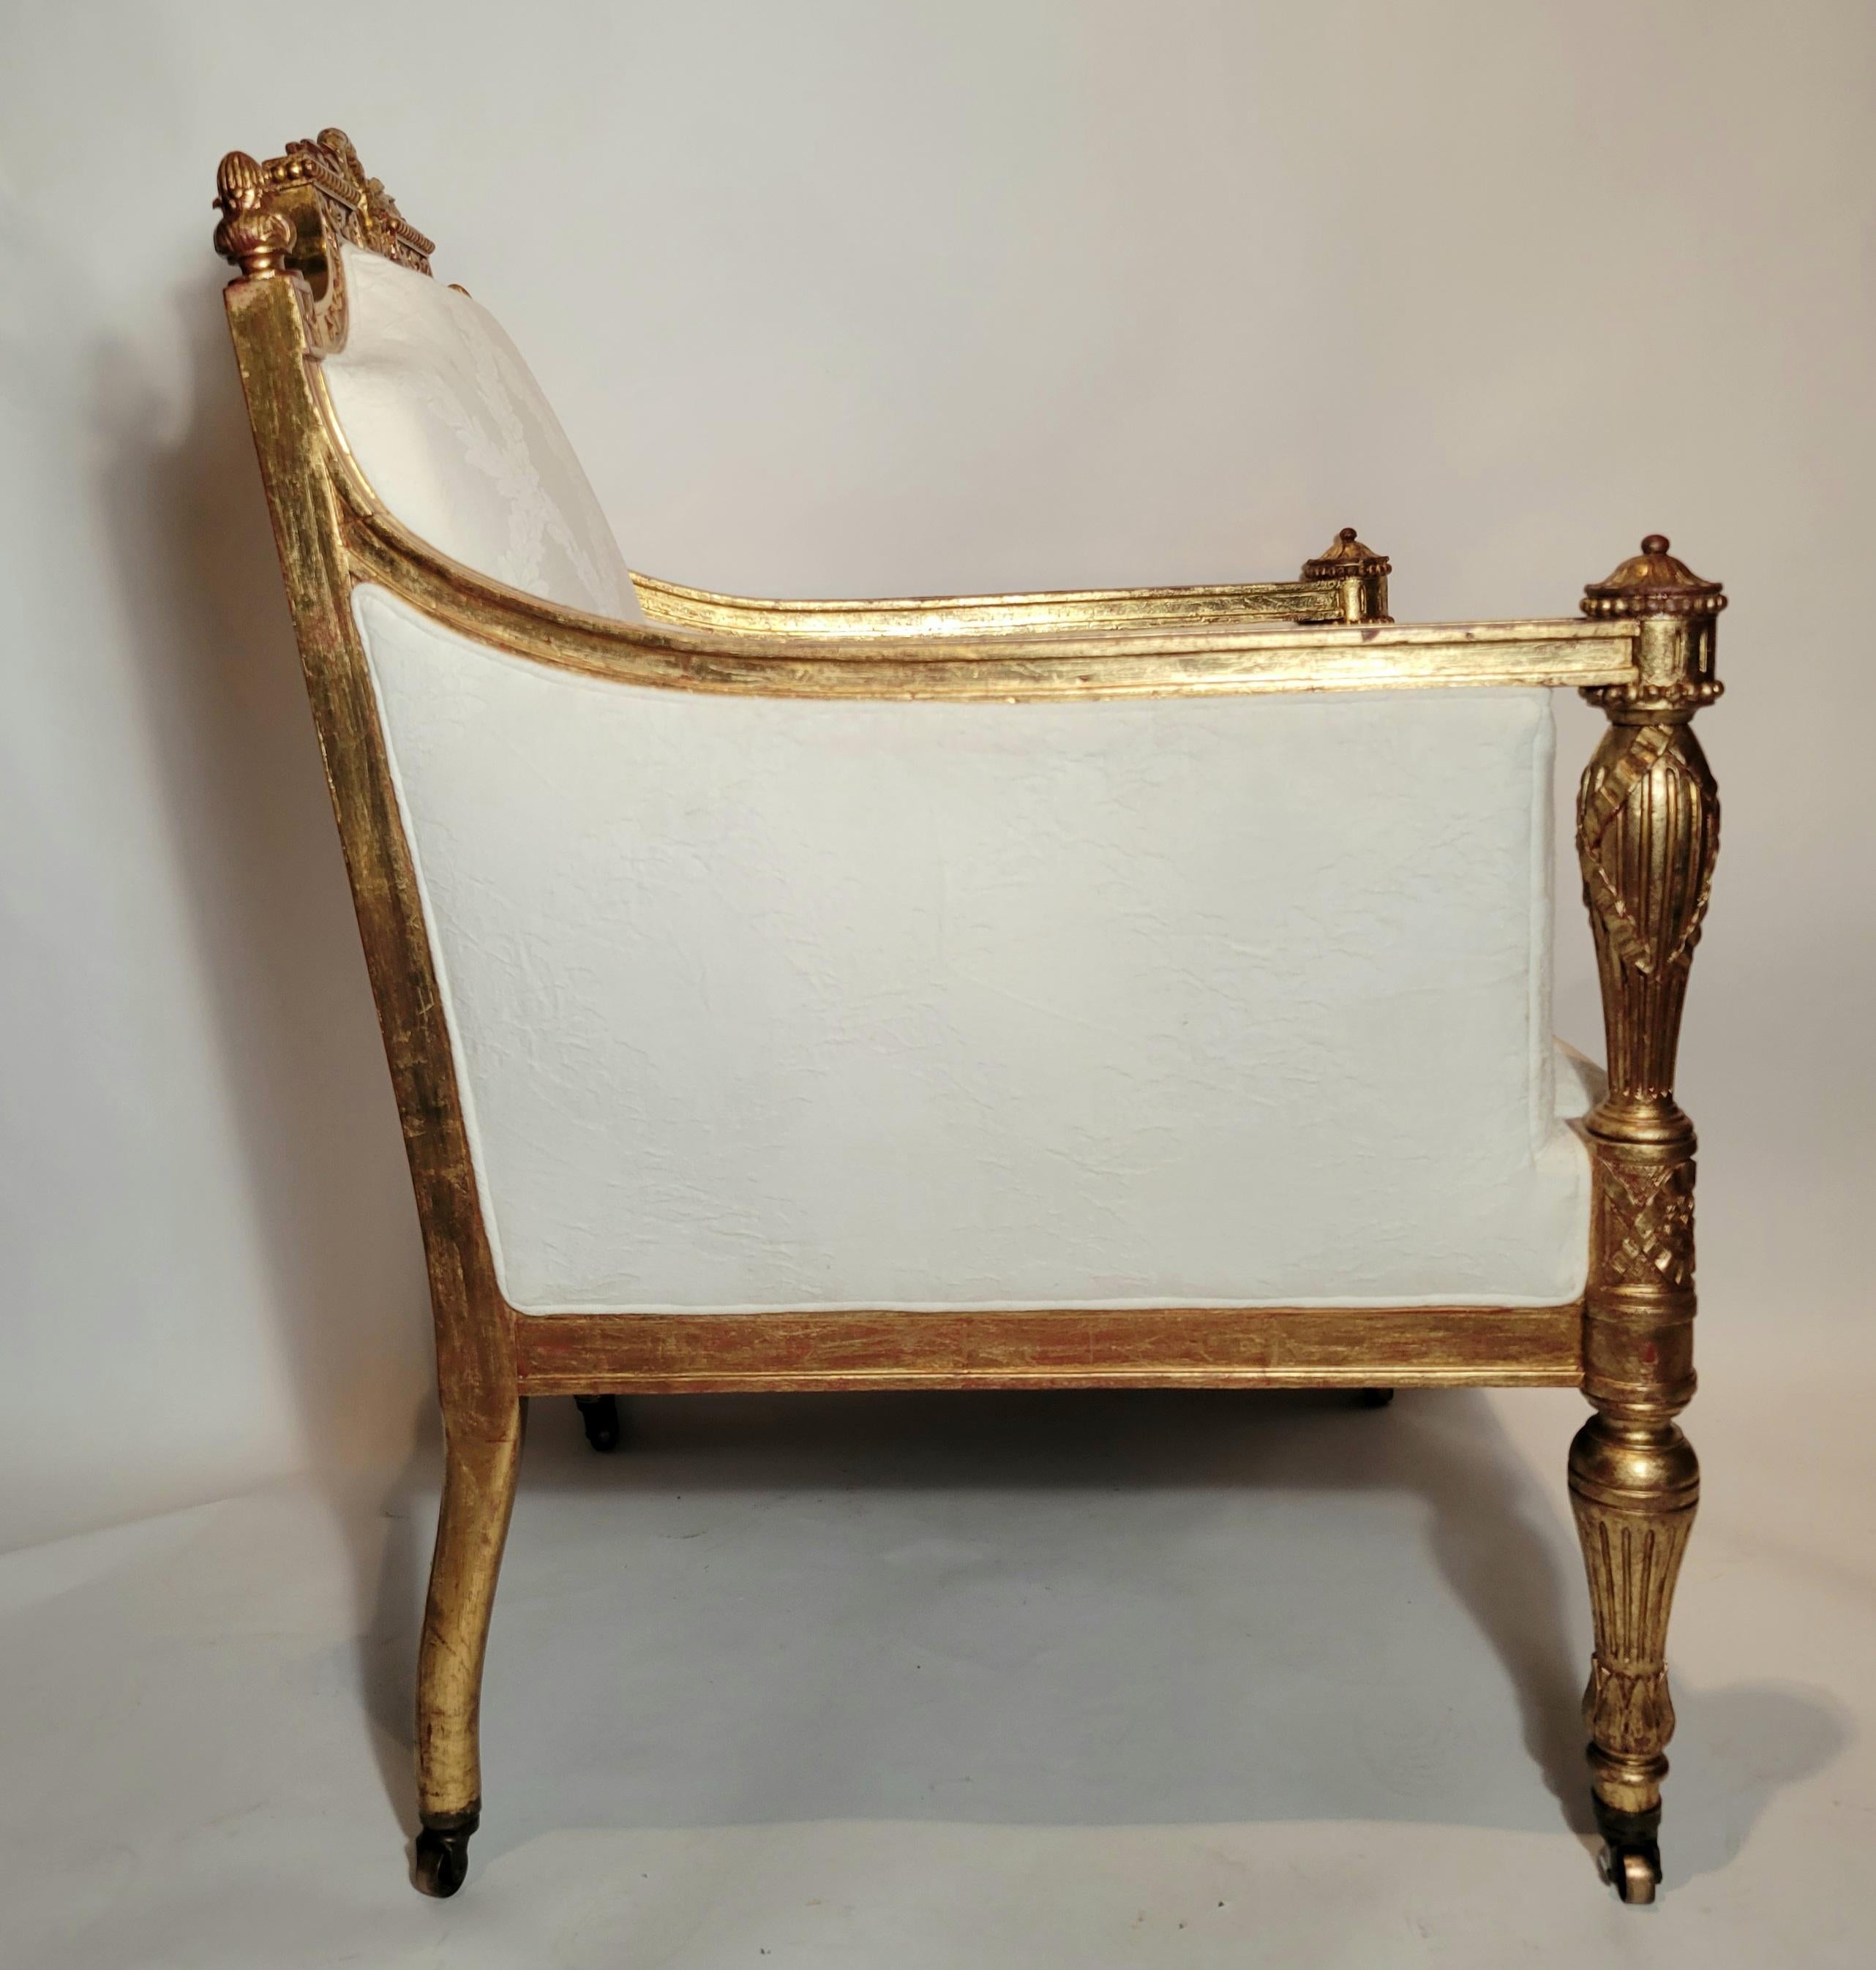 European Antique French Louis XVI Finely Carved Gold Leaf Arm Chair circa 1880-1890 For Sale